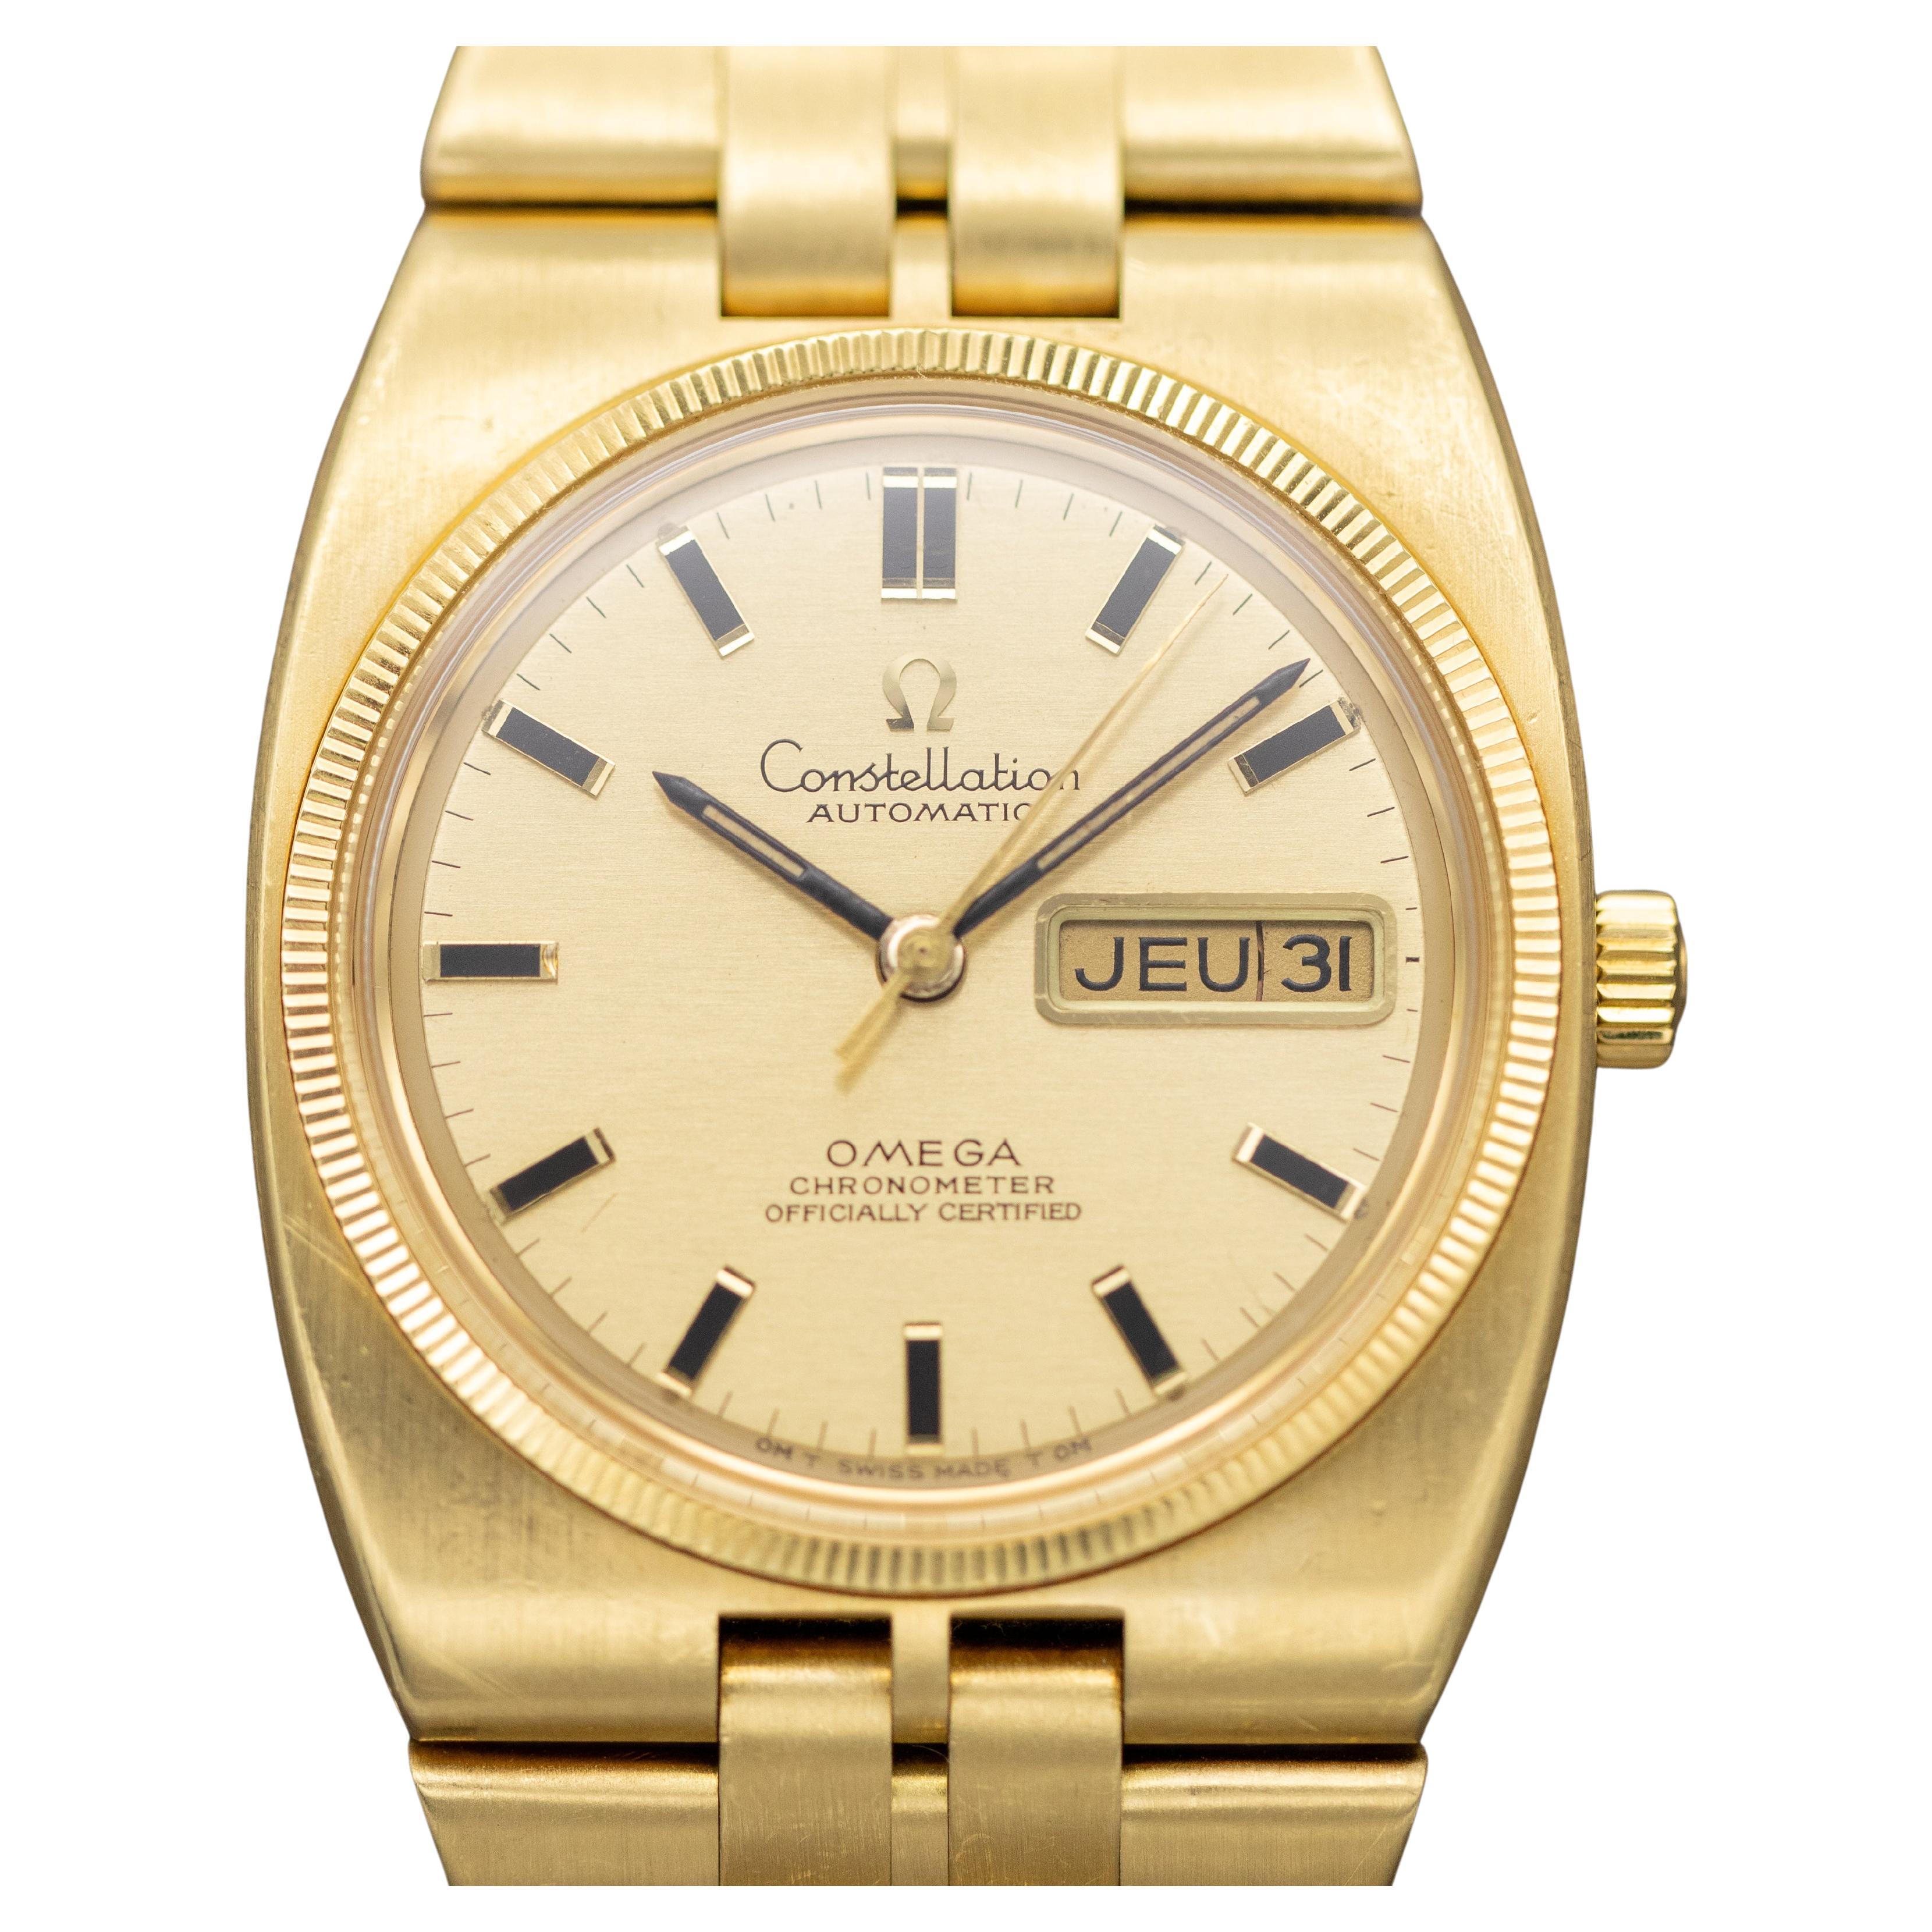 Omega Constellation Automatic Chronometer Day-Date - Vintage 18k Men's Watch For Sale